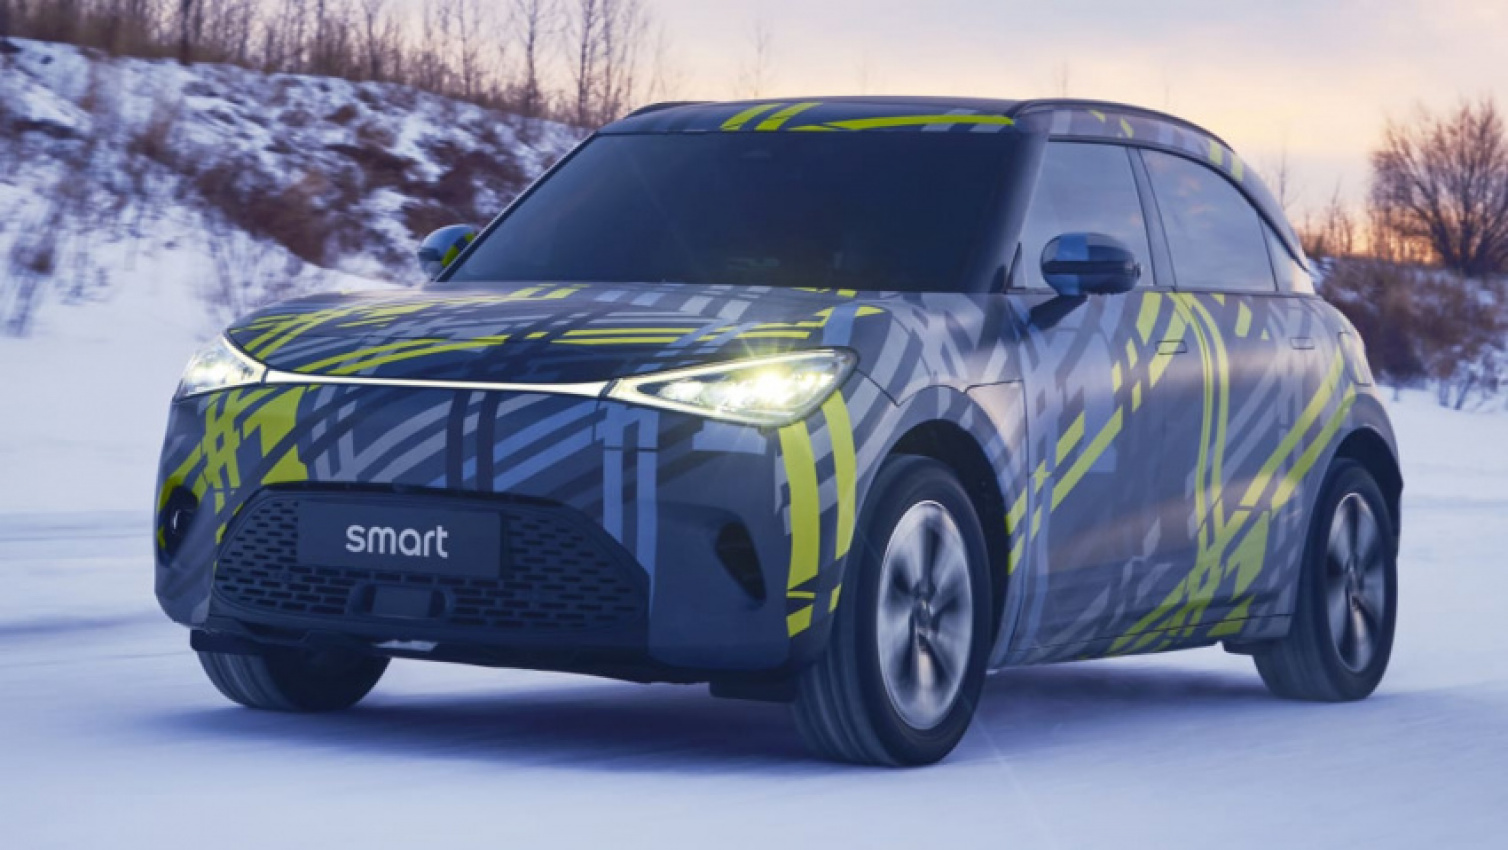 autos, cars, reviews, smart, electric cars, small suvs, new 2022 electric smart #1 suv teased in new images